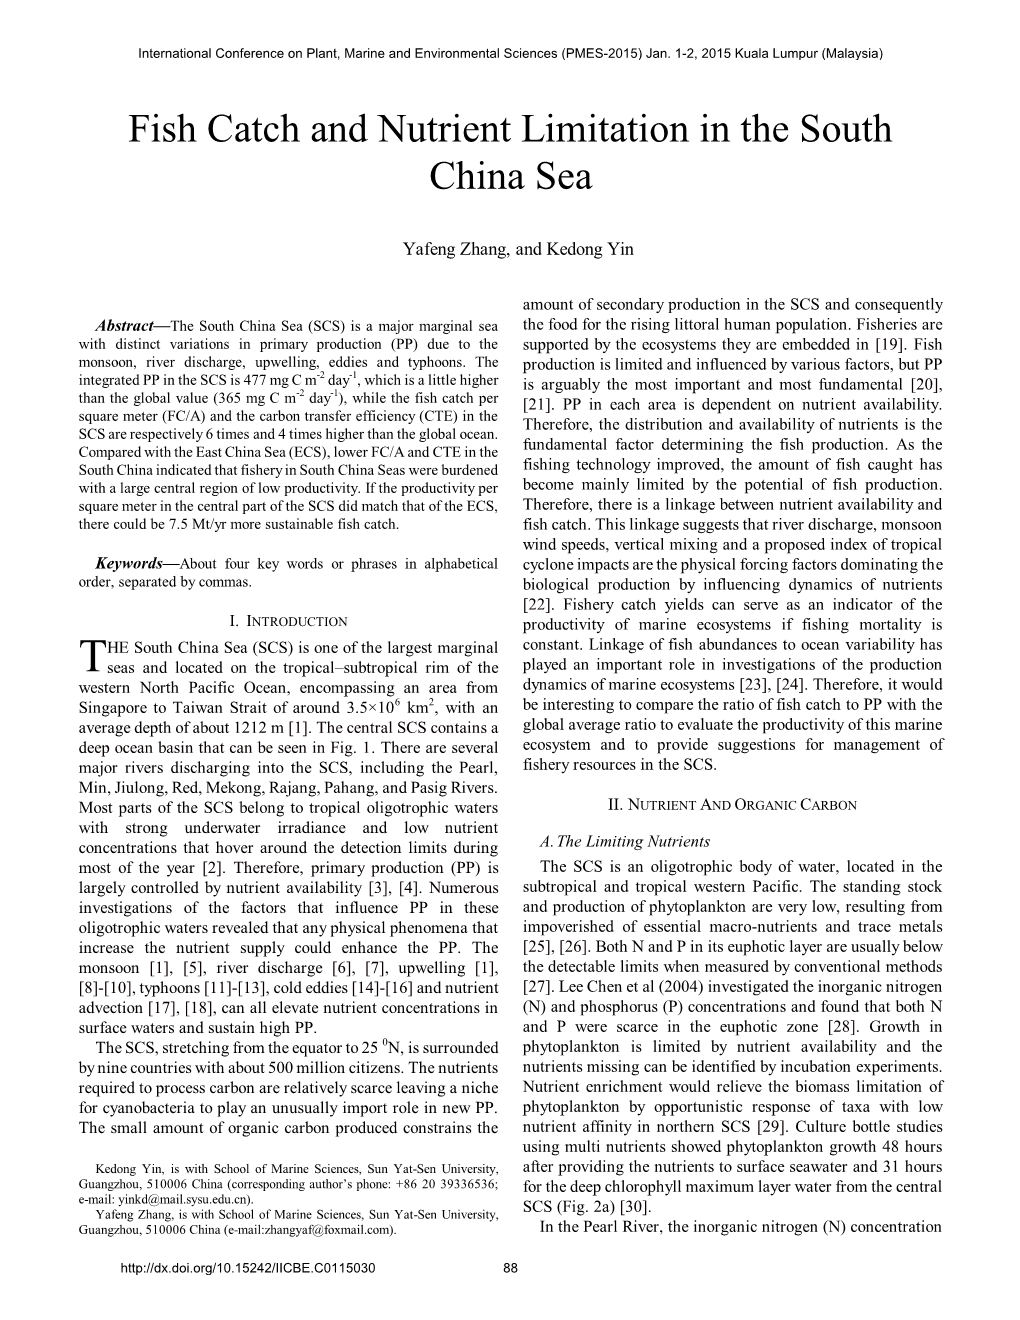 Fish Catch and Nutrient Limitation in the South China Sea